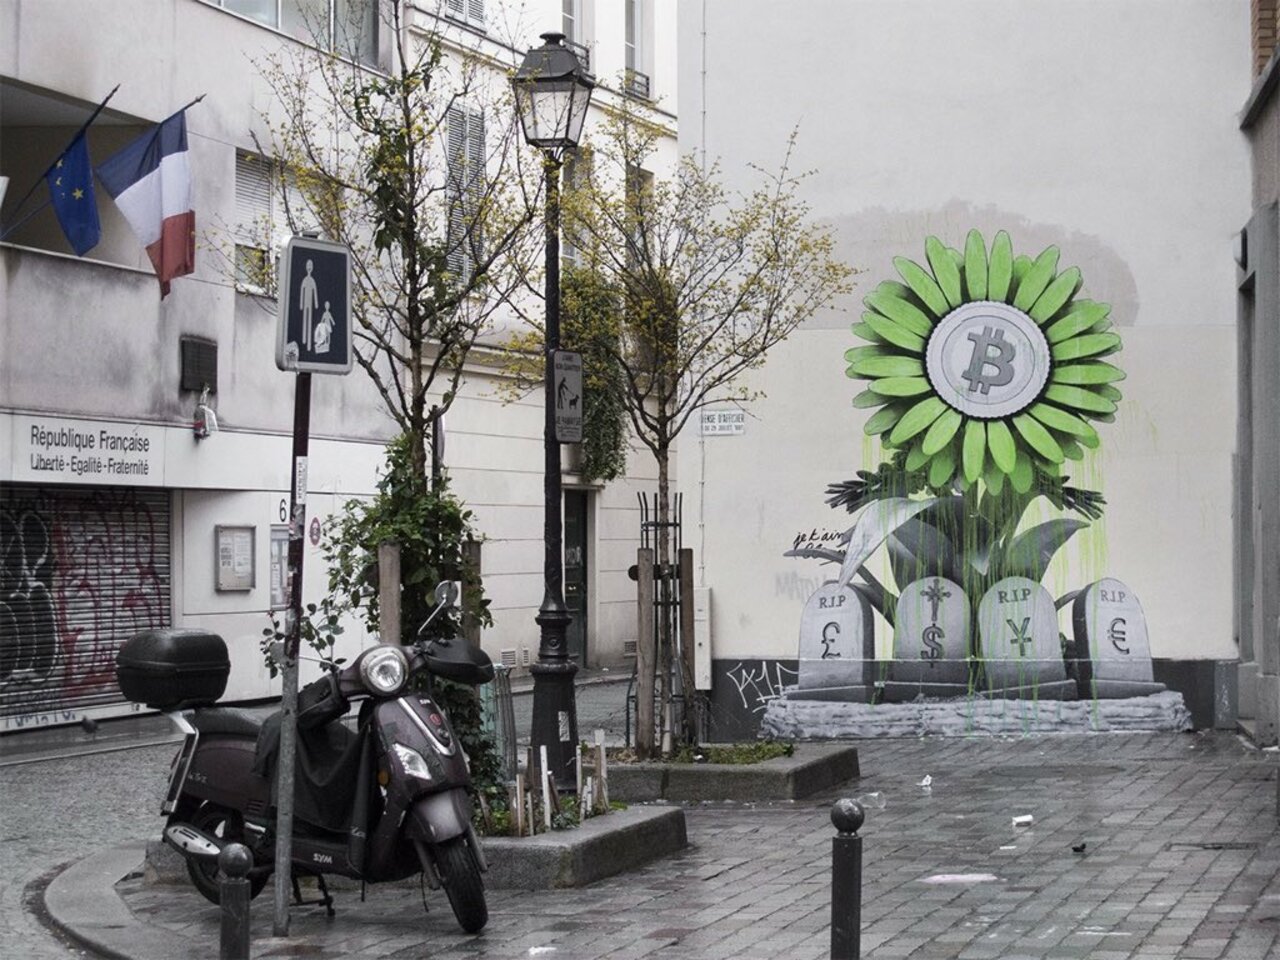 Beautiful #crypto / #bitcoin art in #Paris on 12.02.18 by Ludo. Titled 'RIP banking system' ❤️ #cryptotwitter #dyingfiat #money #powertothepeople #art #graffiti https://t.co/amvMerr5TI